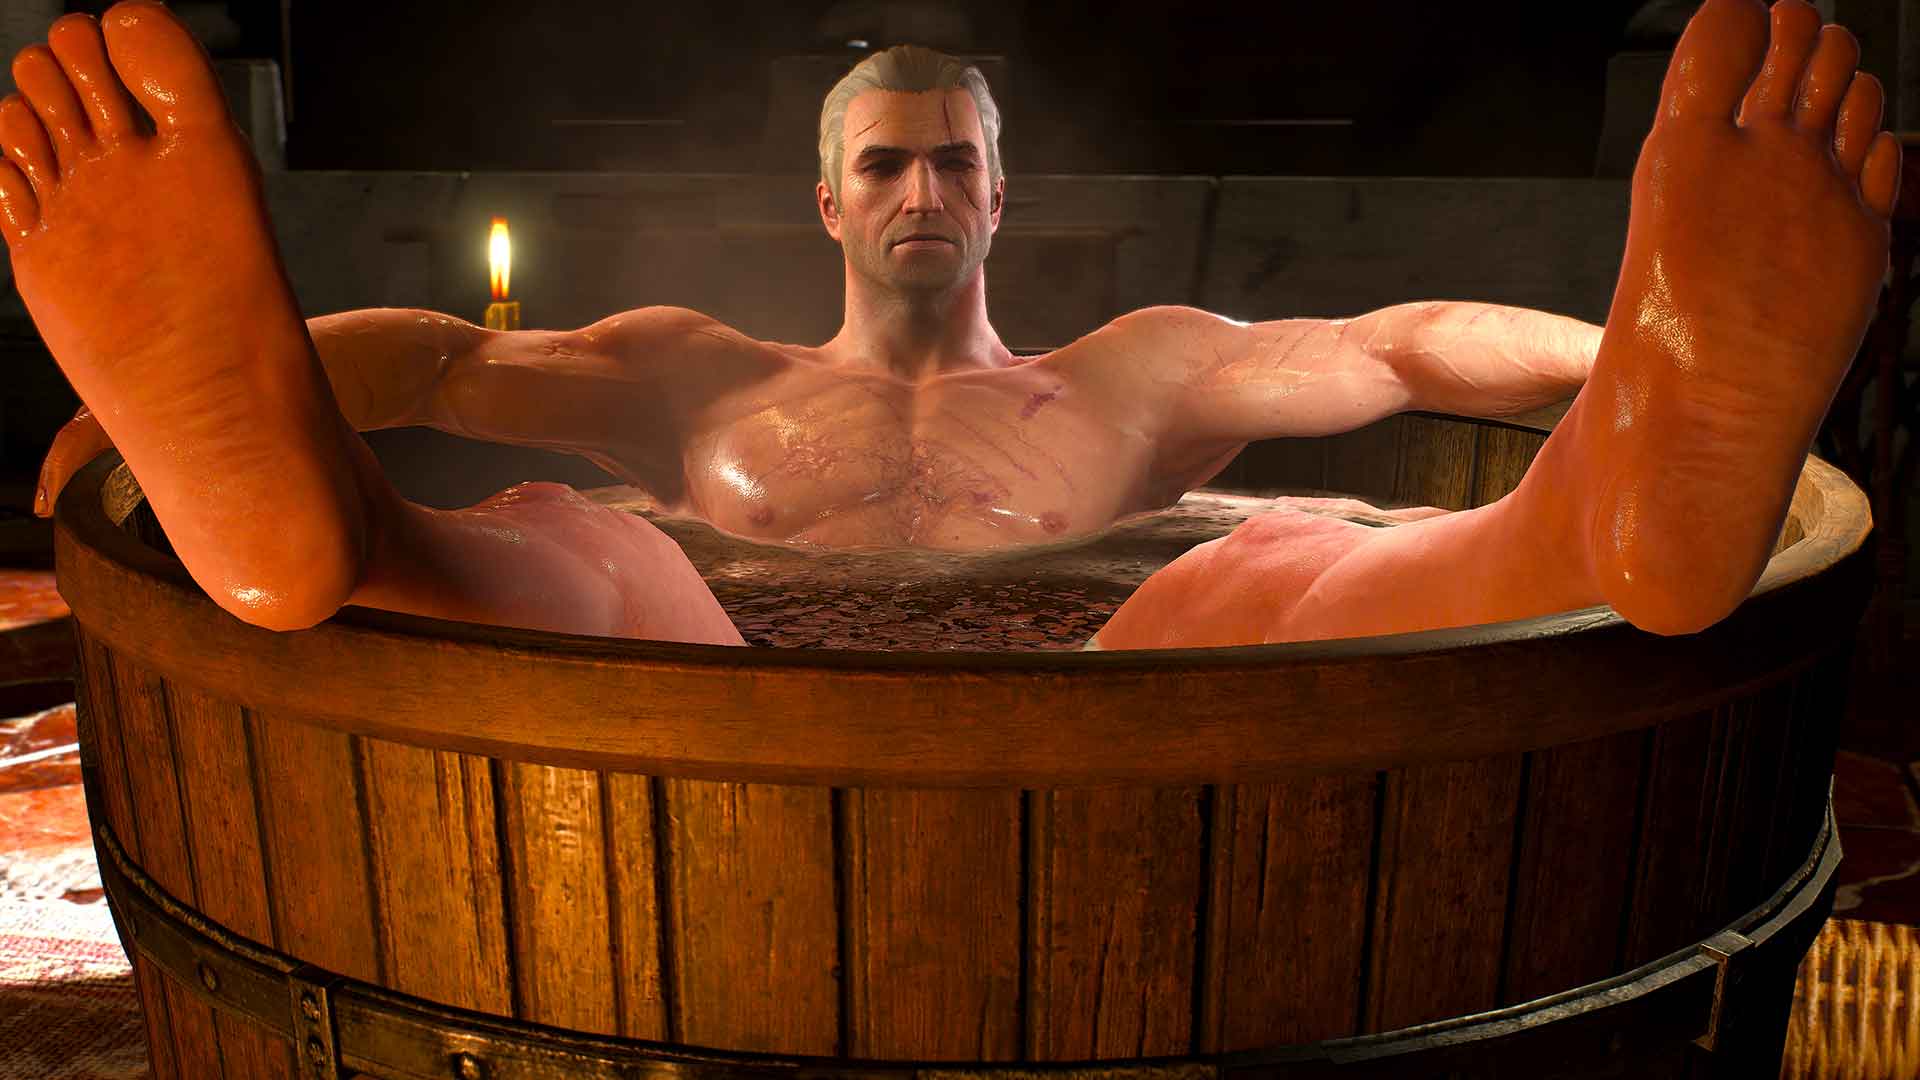 Tub Geralt, just chilling in his tub.